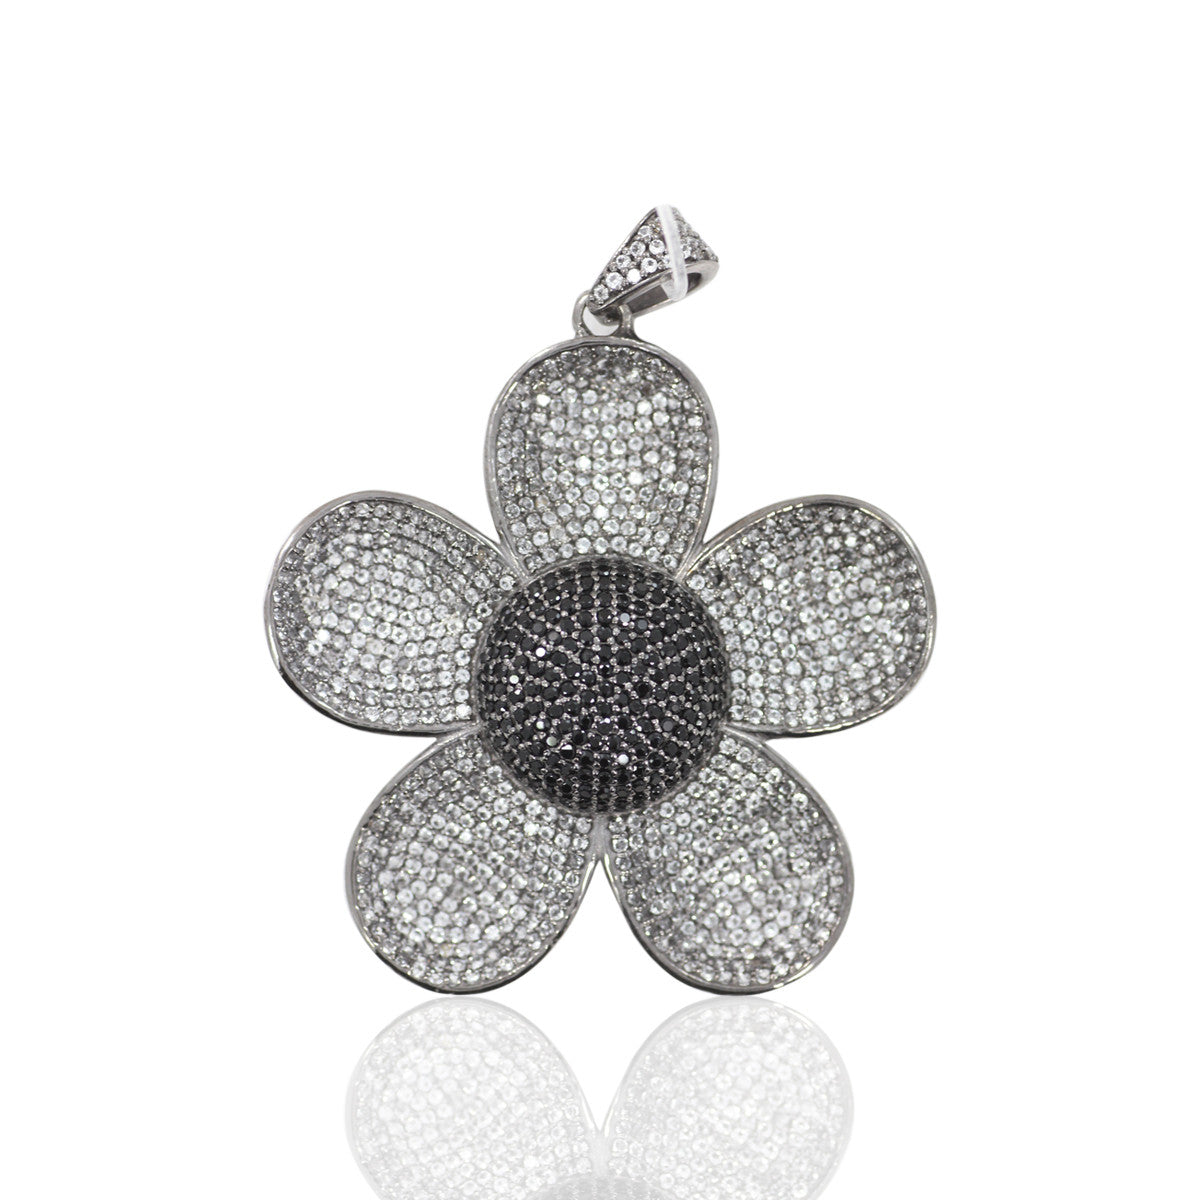 Flowers White Topaz/Black Spinel Charm, Pave Black Spinel ,Approx 1.76'' ( 44 x 44 mm) Oxidized Silver, Silver ,Black Spinel/White Topaz